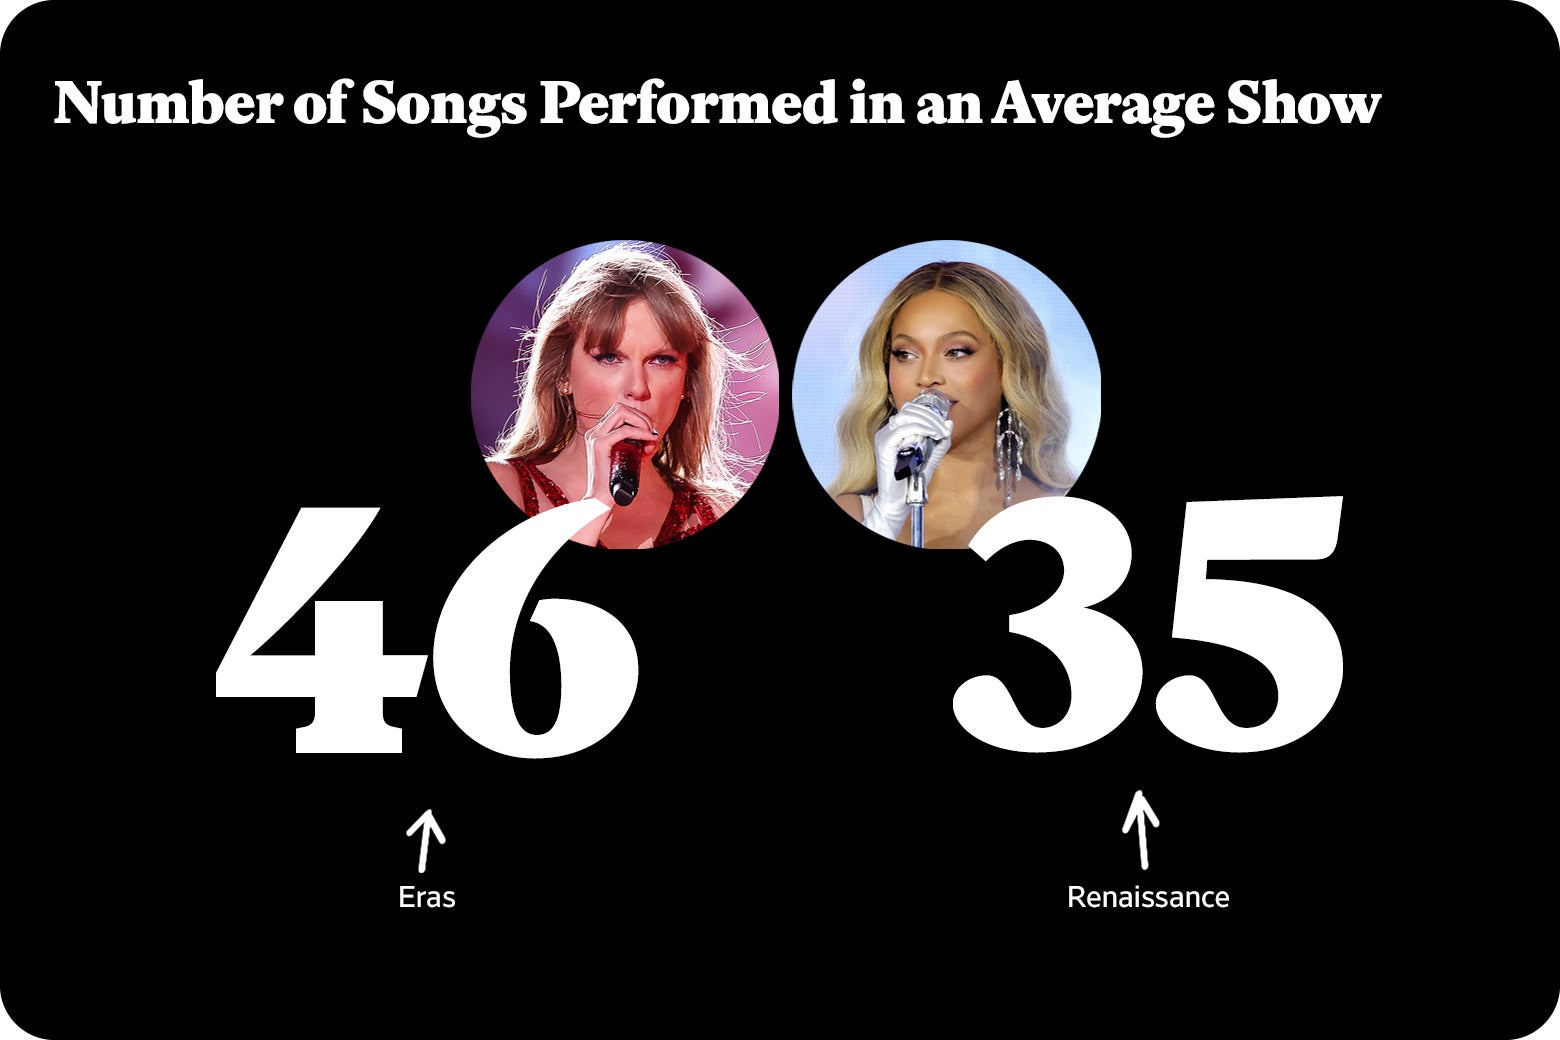 Taylor and Beyonce both hold microphones. 